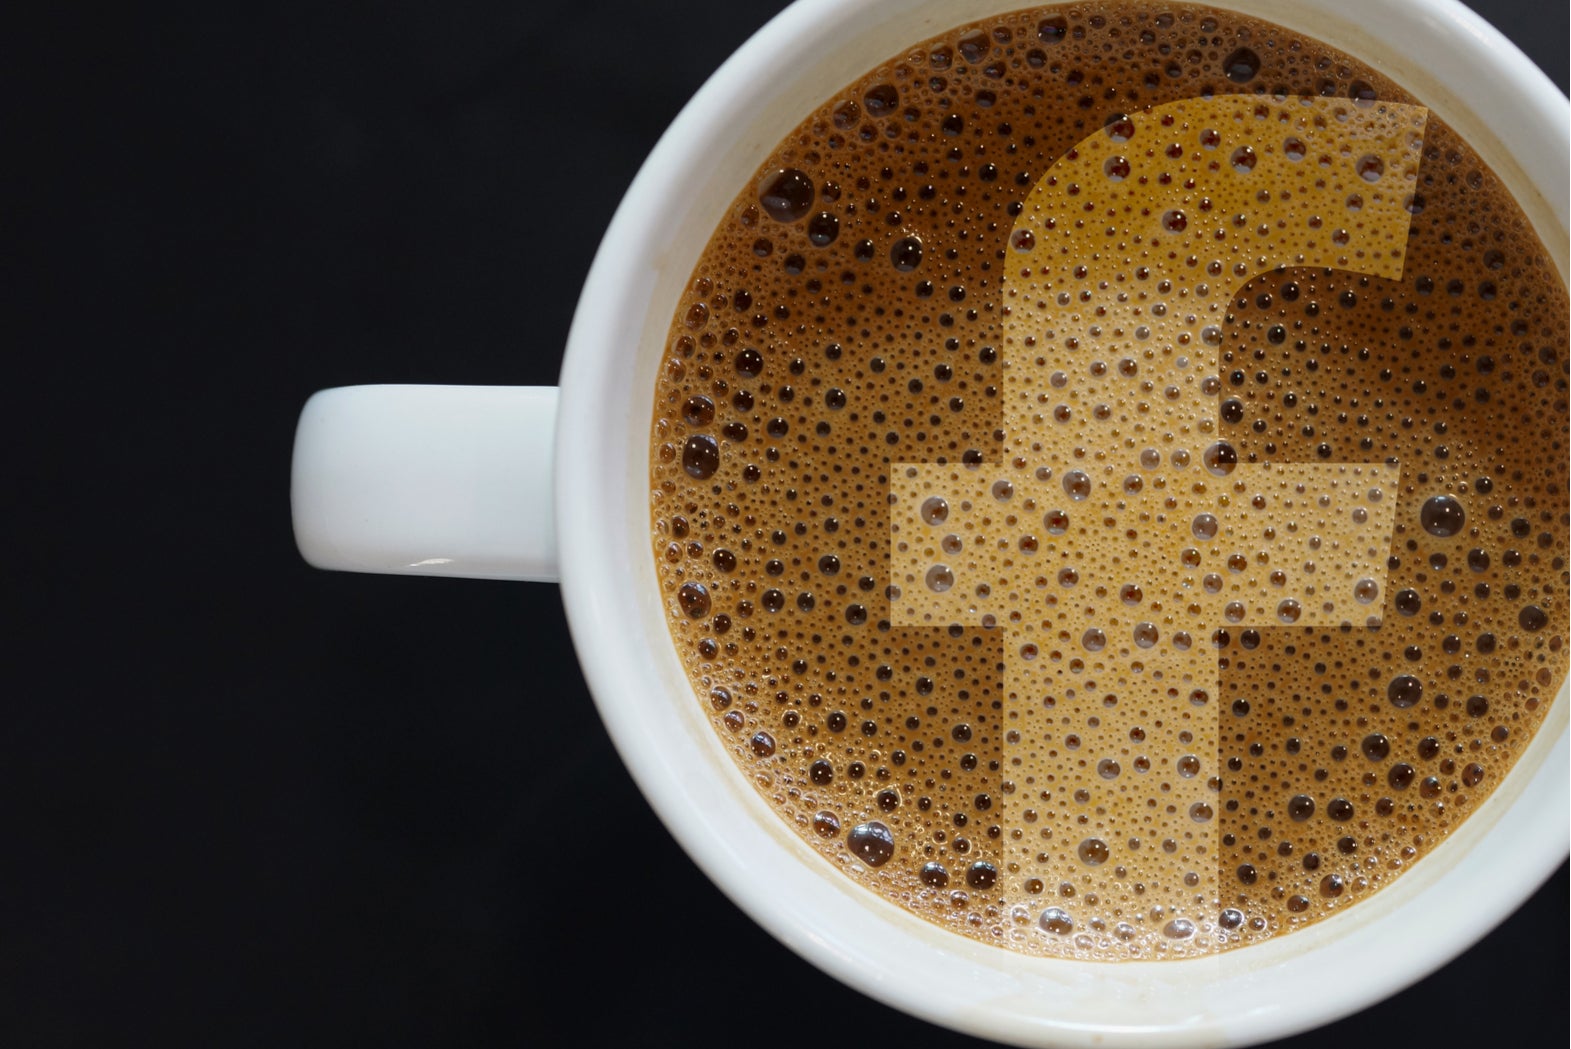 Sorry Facebook, you can’t claw back the public’s trust with a pop-up café